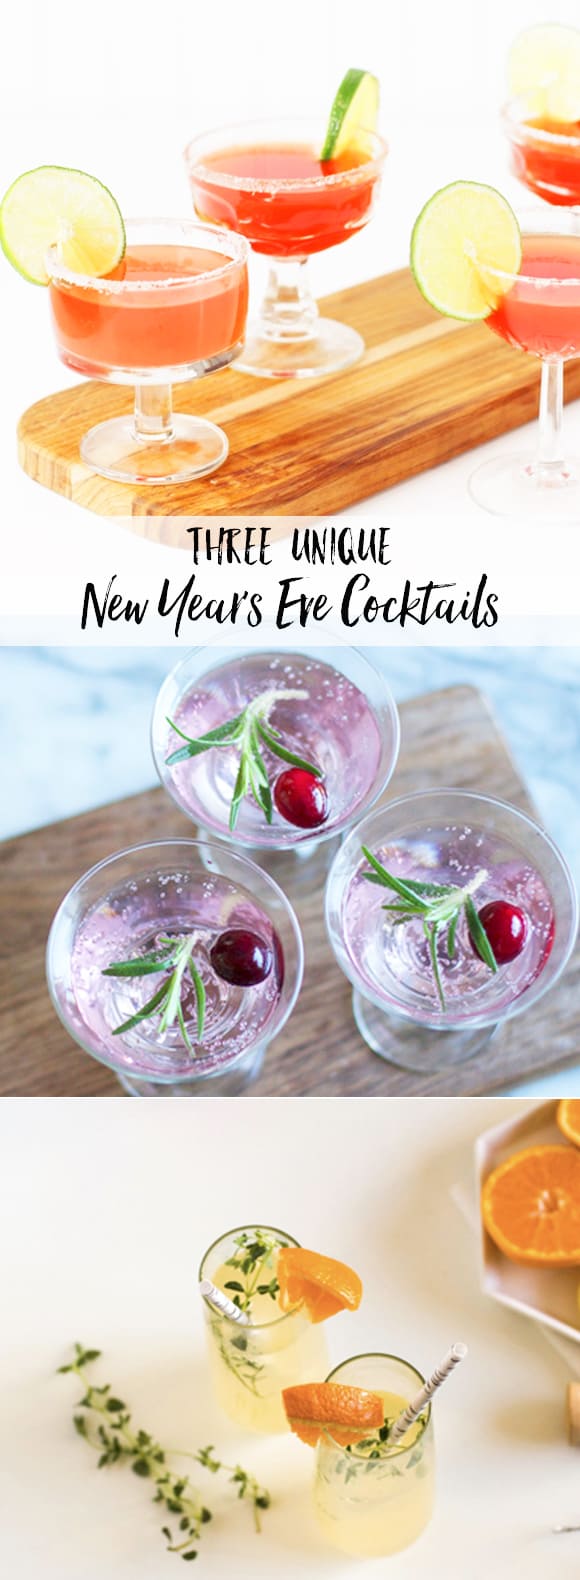 http://www.thoughtfullysimple.com/wp-content/uploads/2016/12/new-years-eve-cocktails.jpg